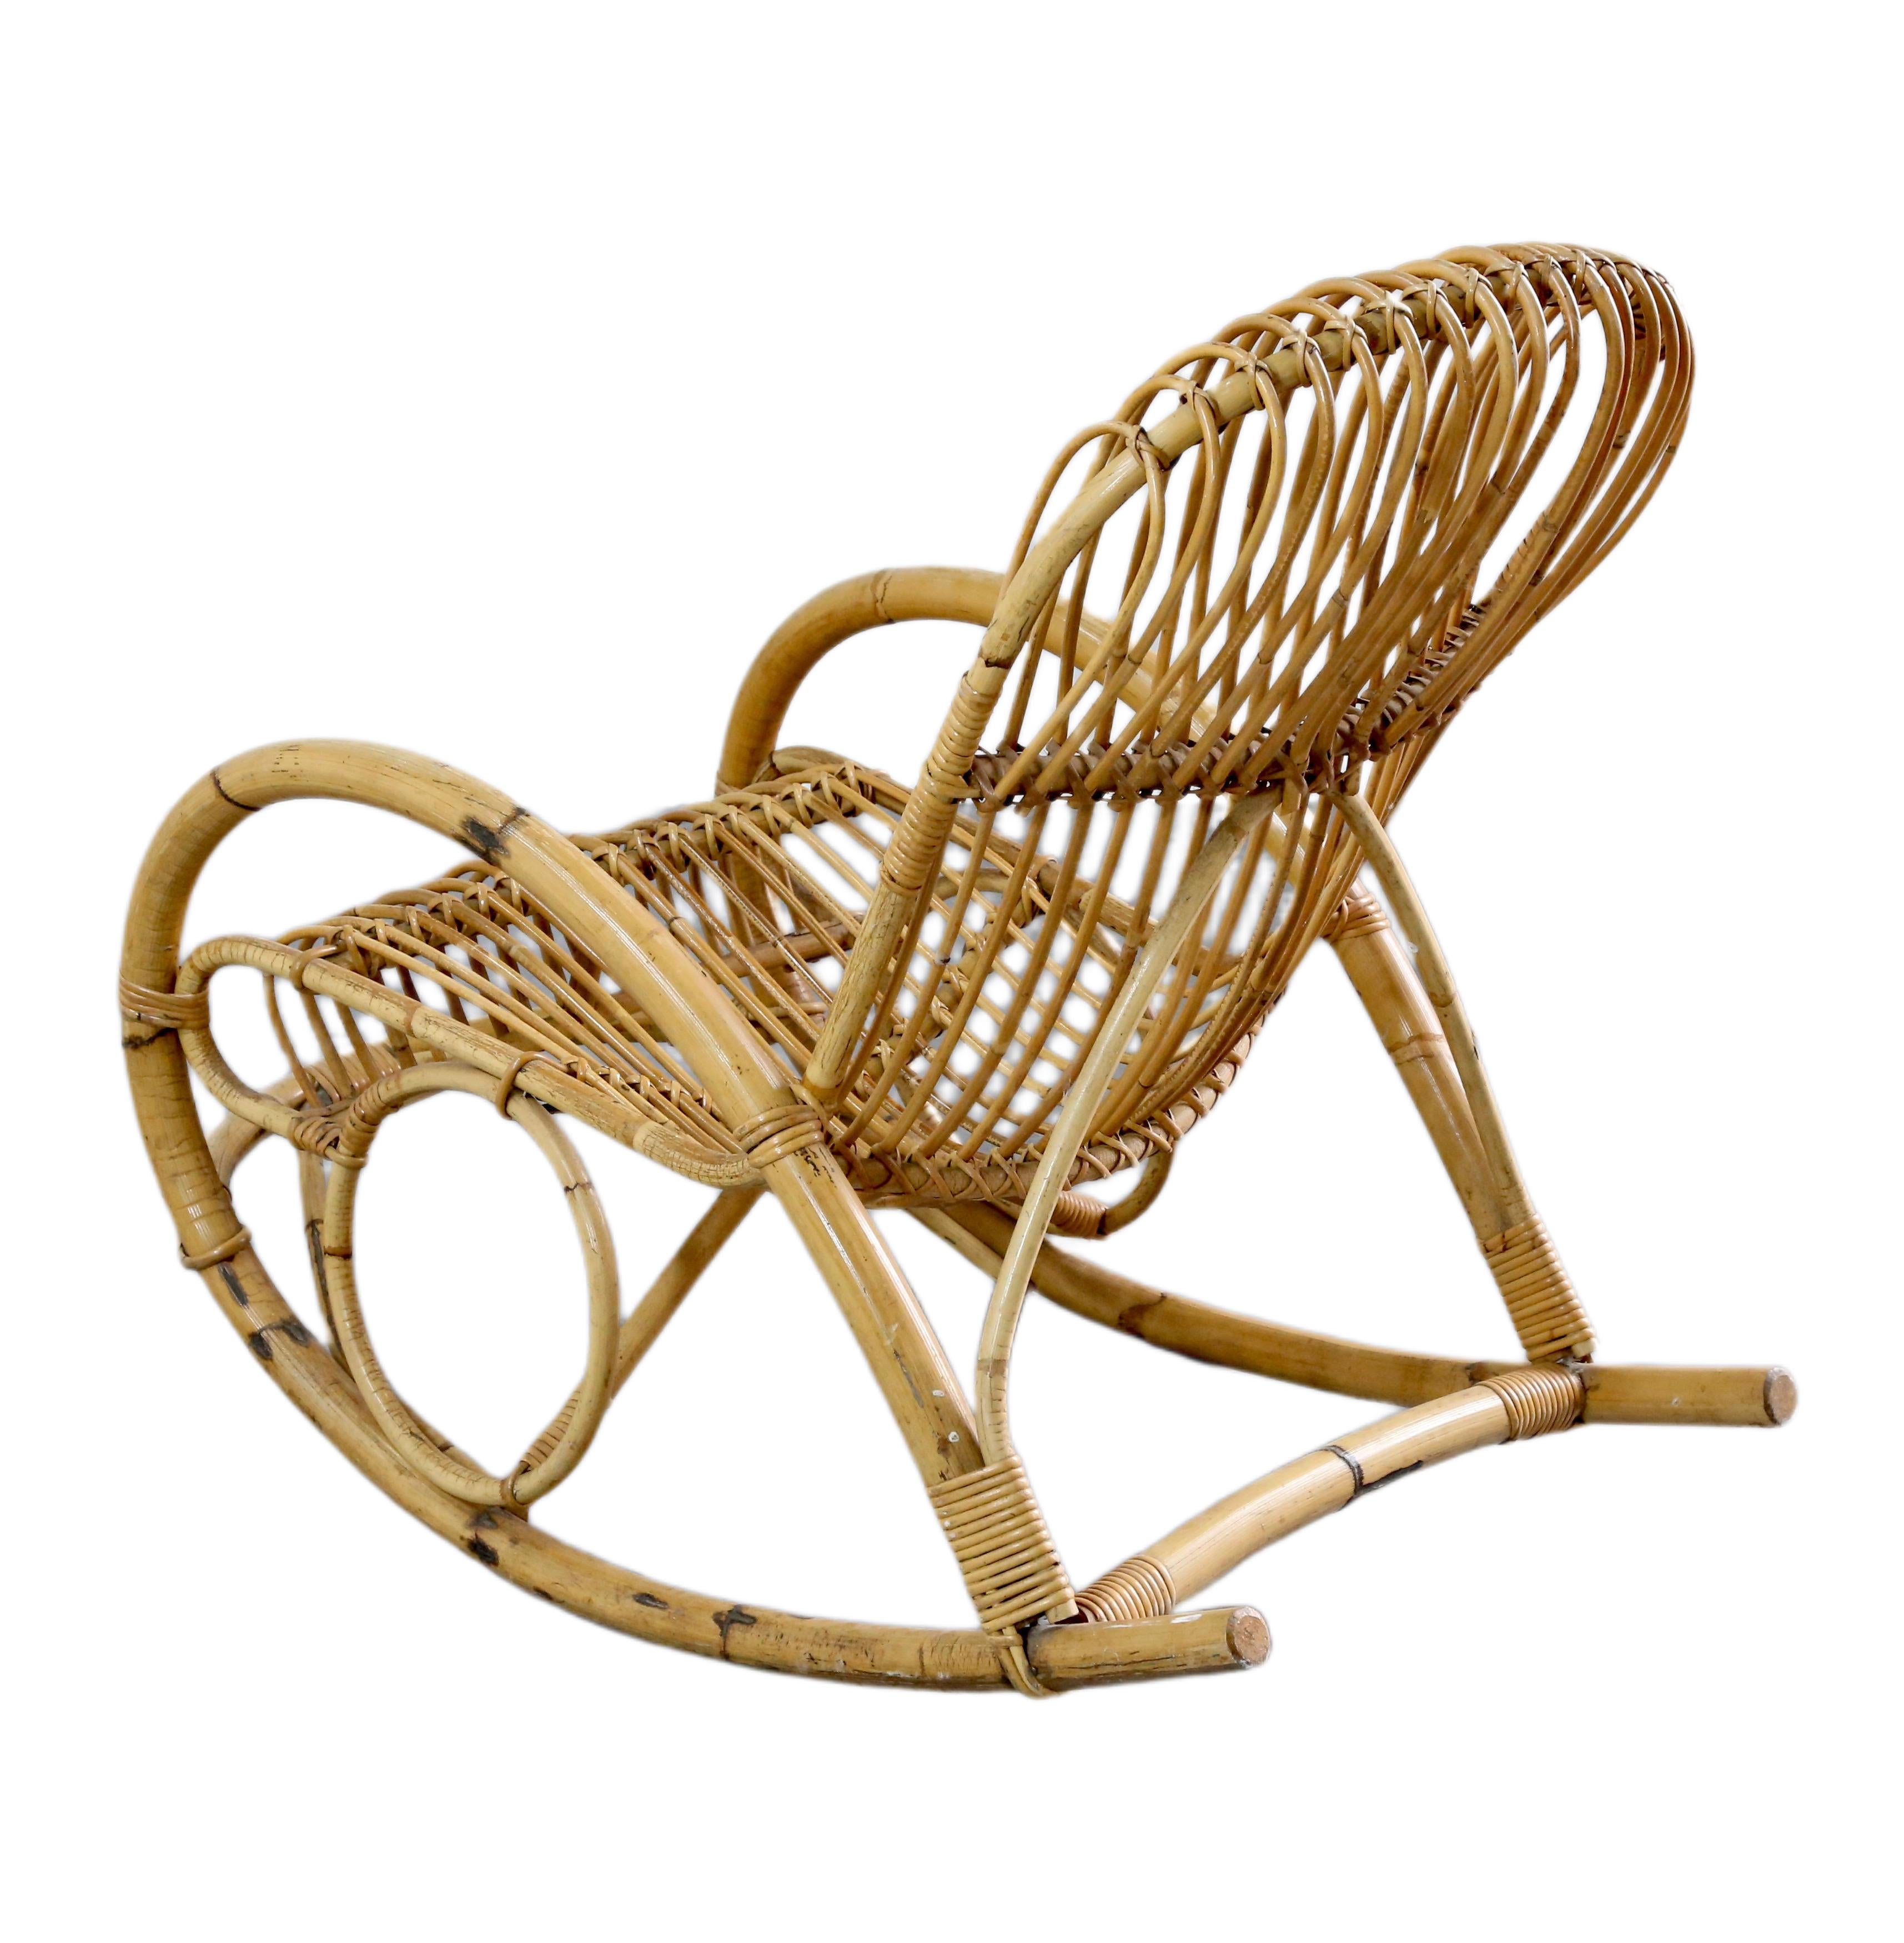 20th Century Boho Style Bamboo Wicker Rocking Chair By Dirk Van Sliedregt For Rohe Noordwolde For Sale